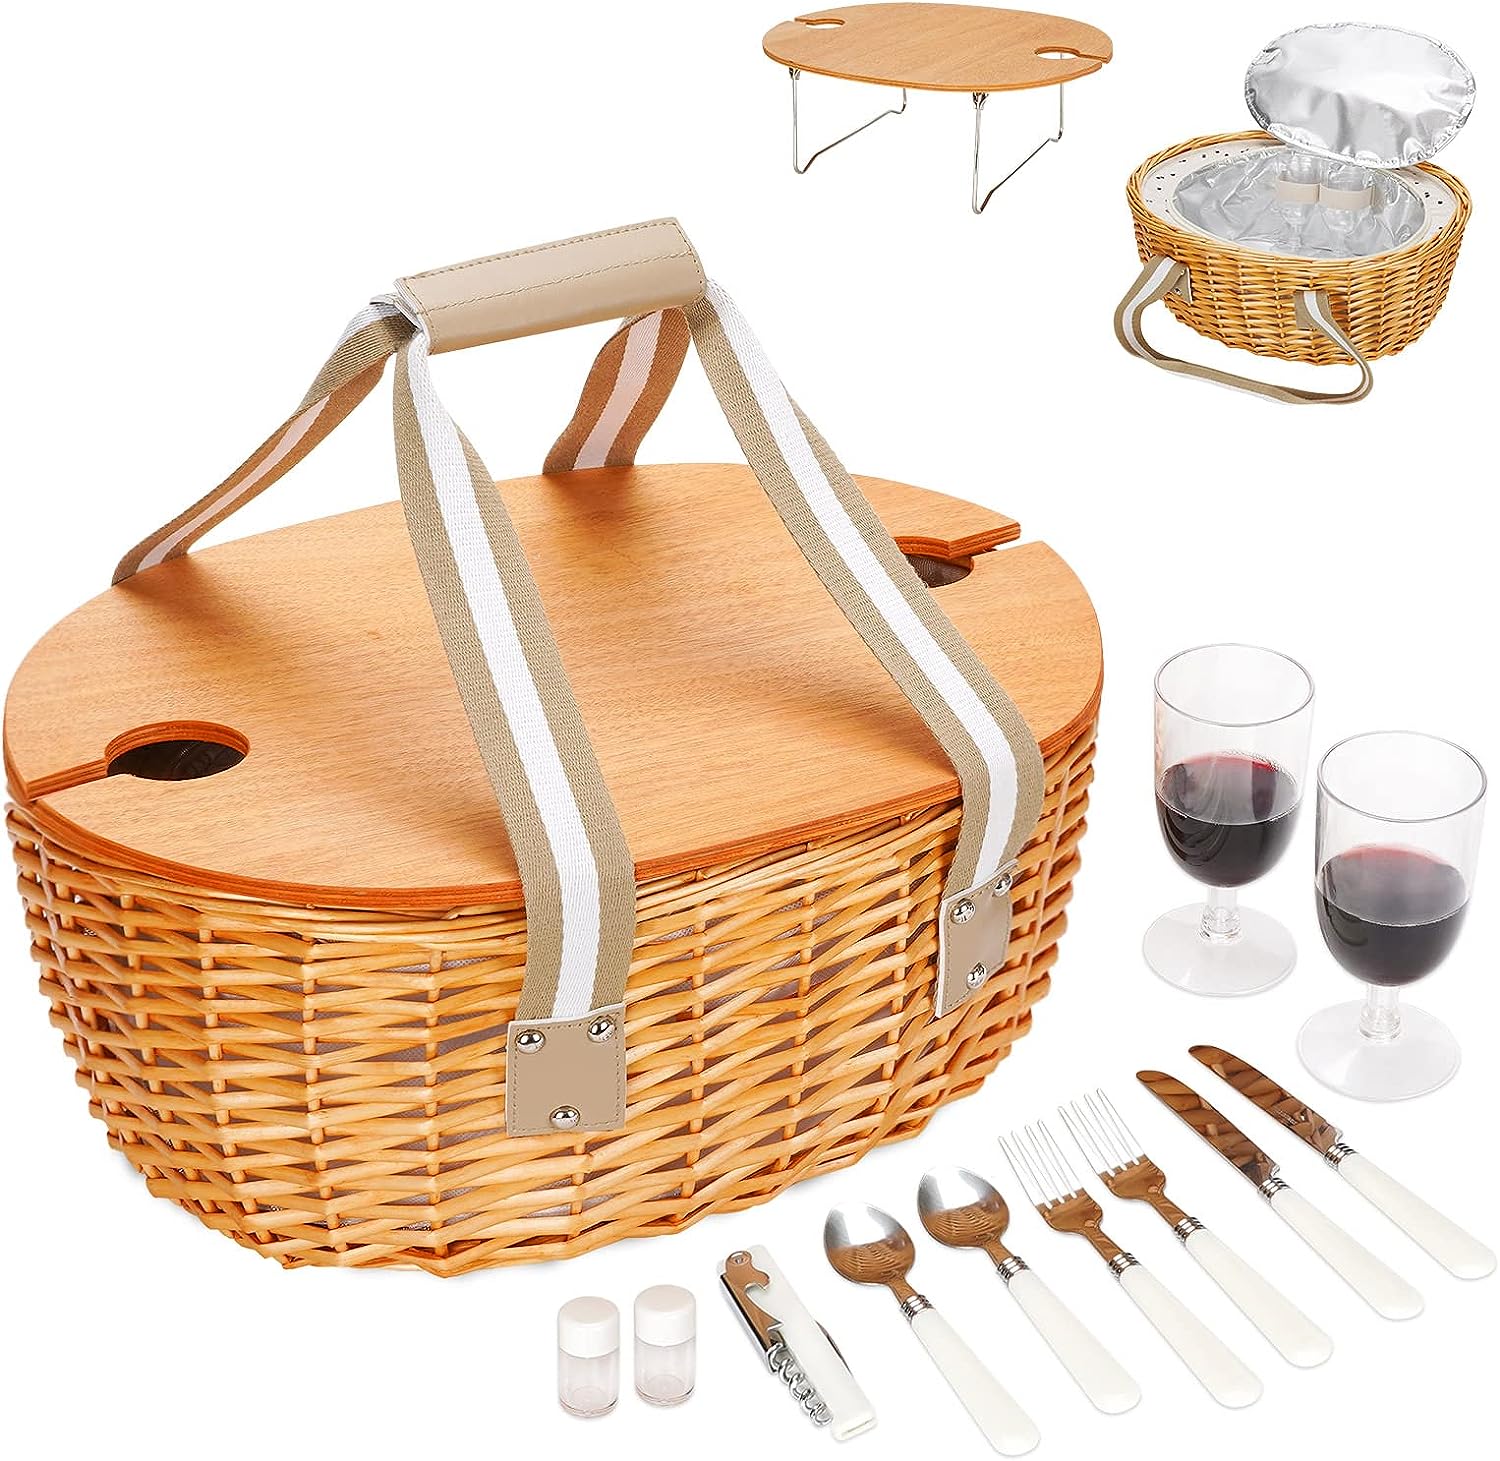 STBoo Wicker Picnic Basket for 2 with Large Insulated Cooler Compartment and Folding Table, Cutlery Service Kits, Willow Hamper Set with Woven Handles for Camping, Outdoor, Christmas, Party(Beige)